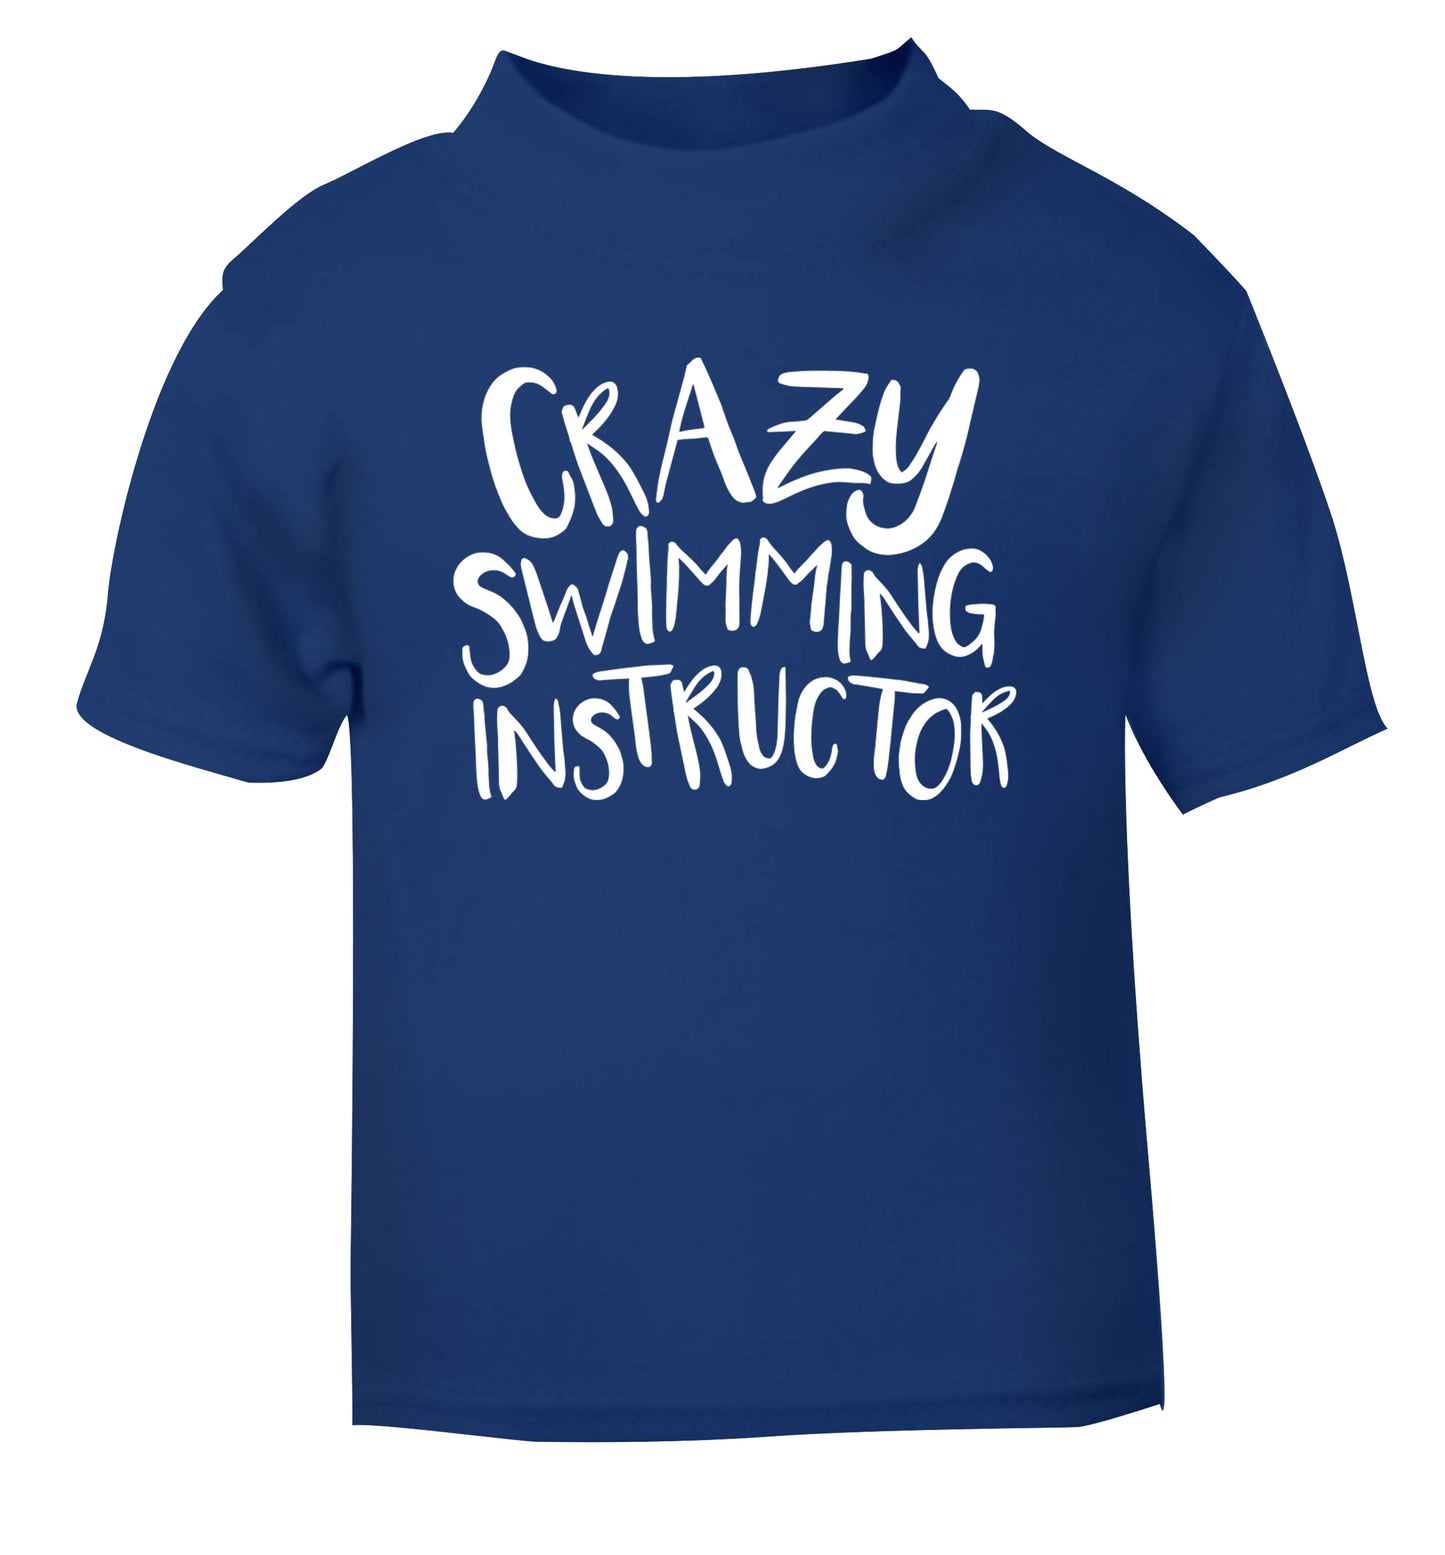 Crazy swimming instructor blue Baby Toddler Tshirt 2 Years